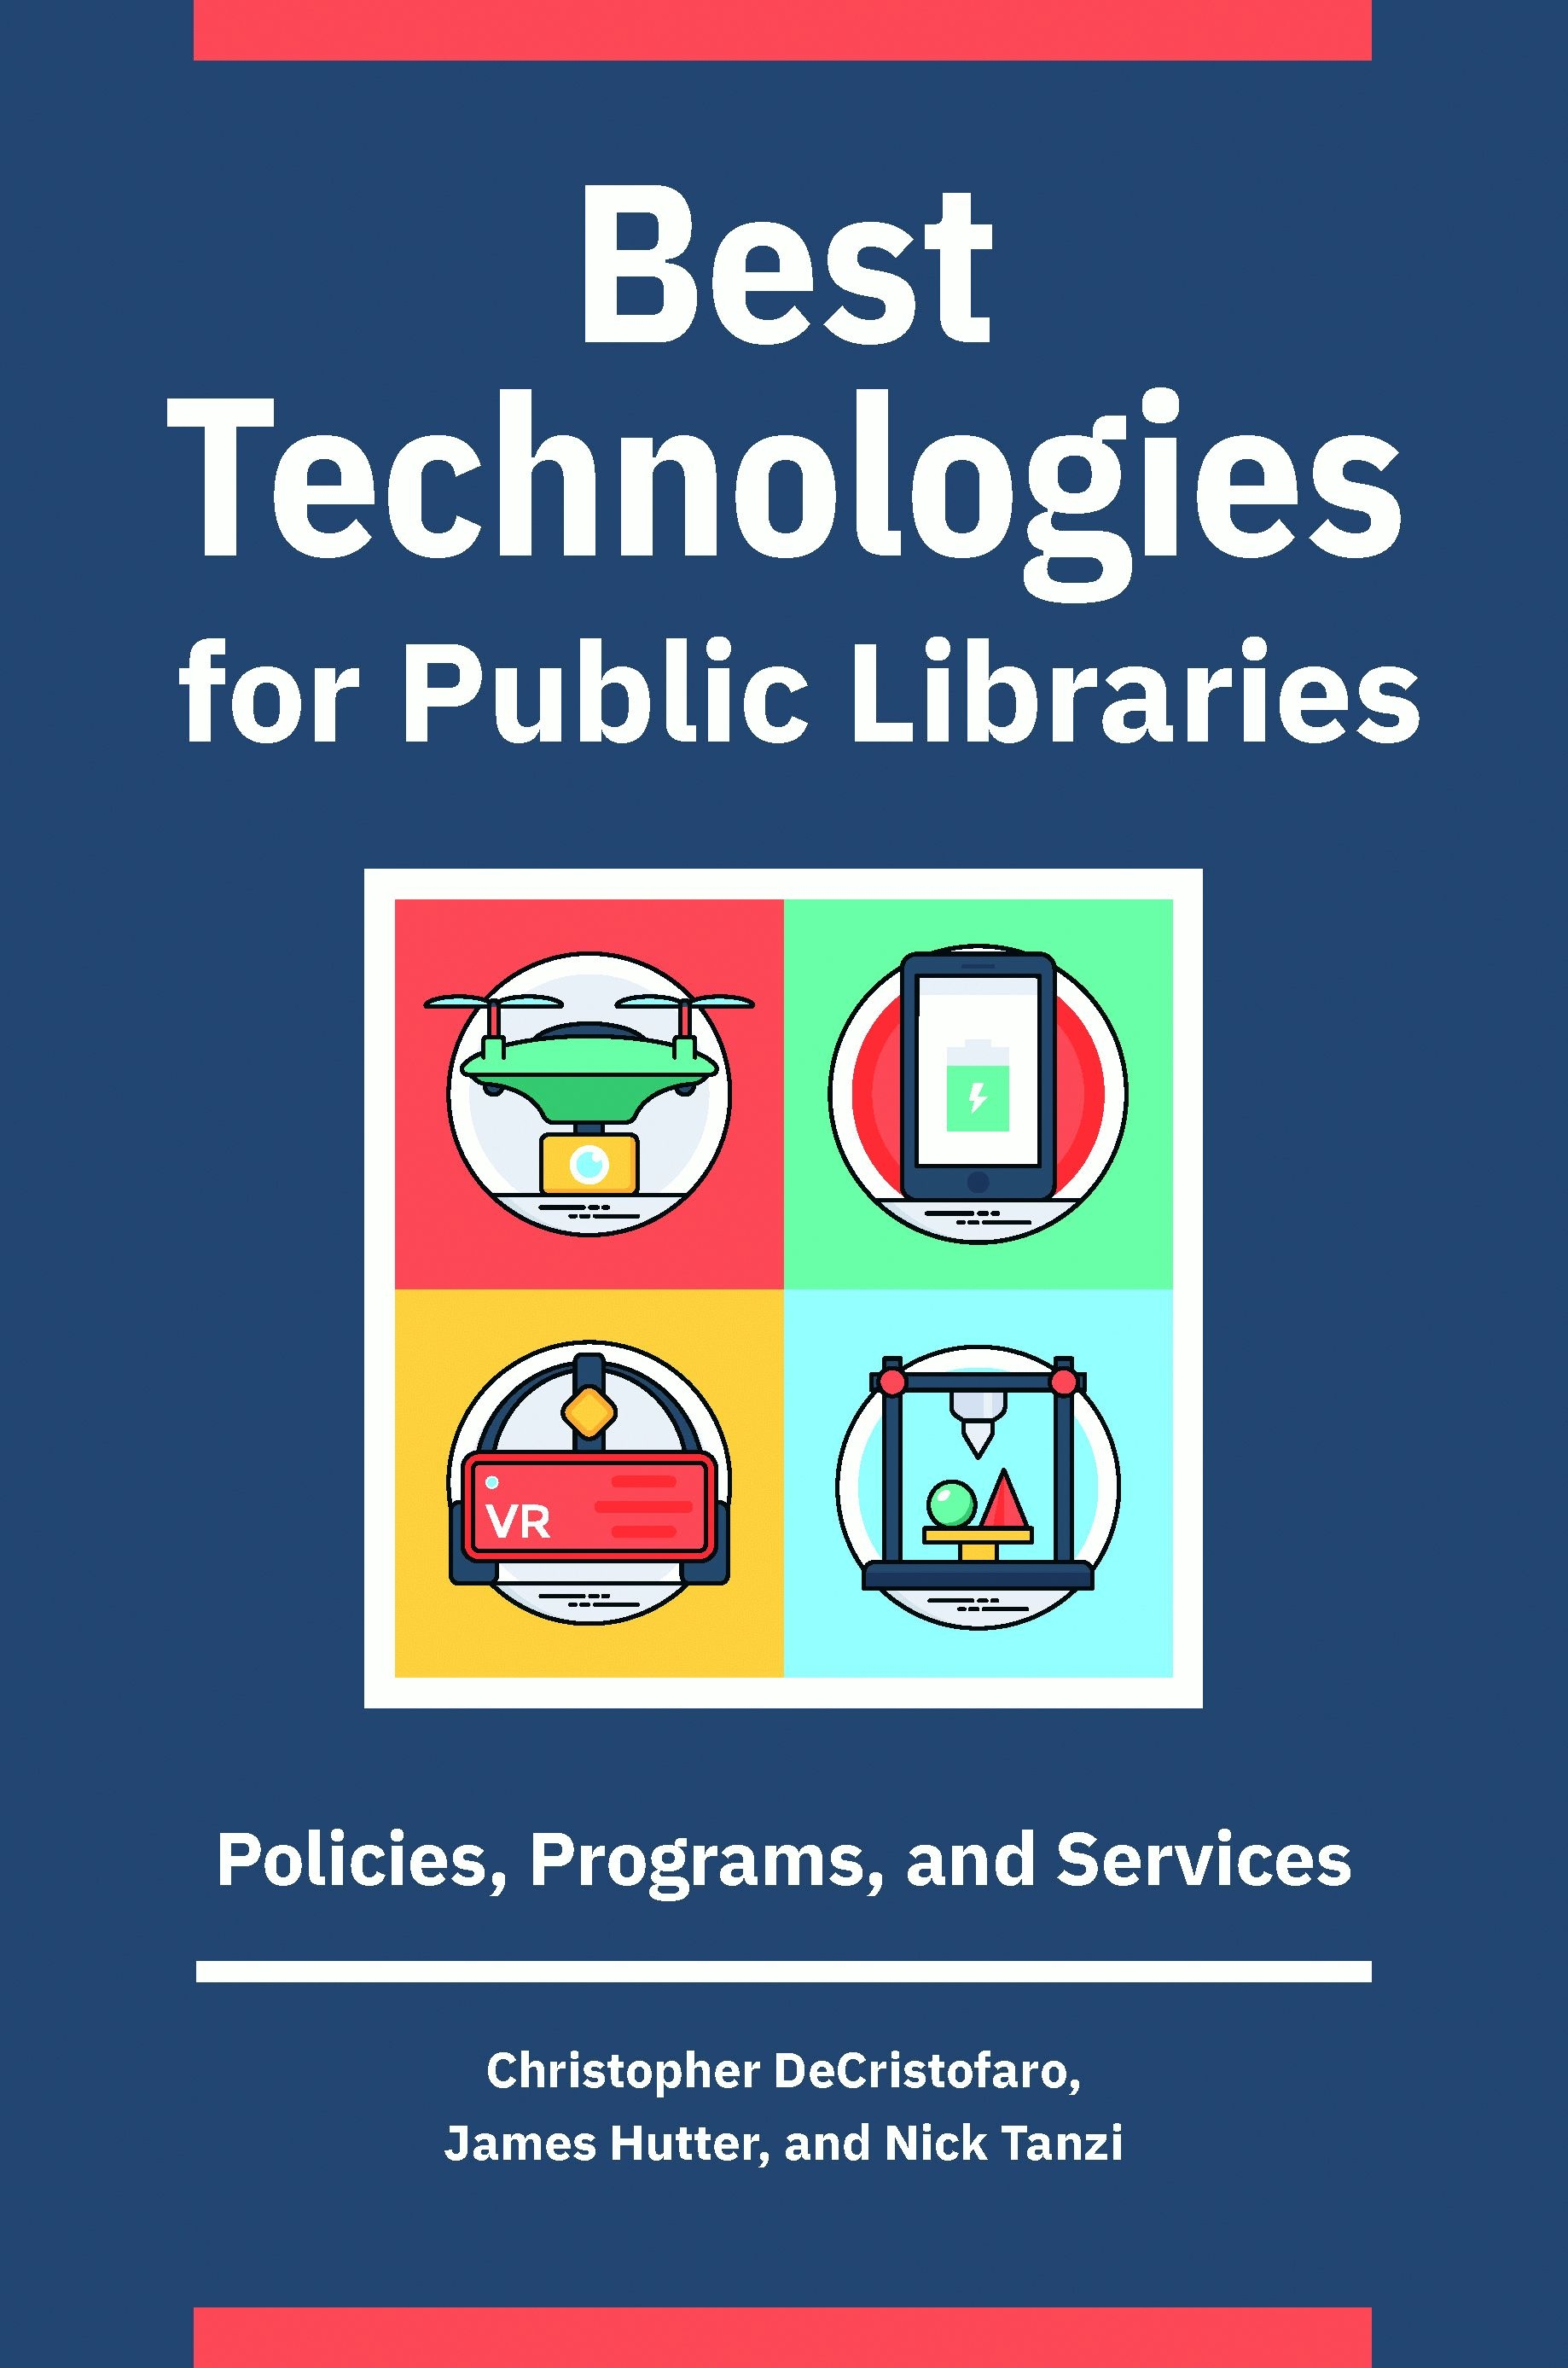 Best Technologies for Public Libraries: Policies, Programs, and Services